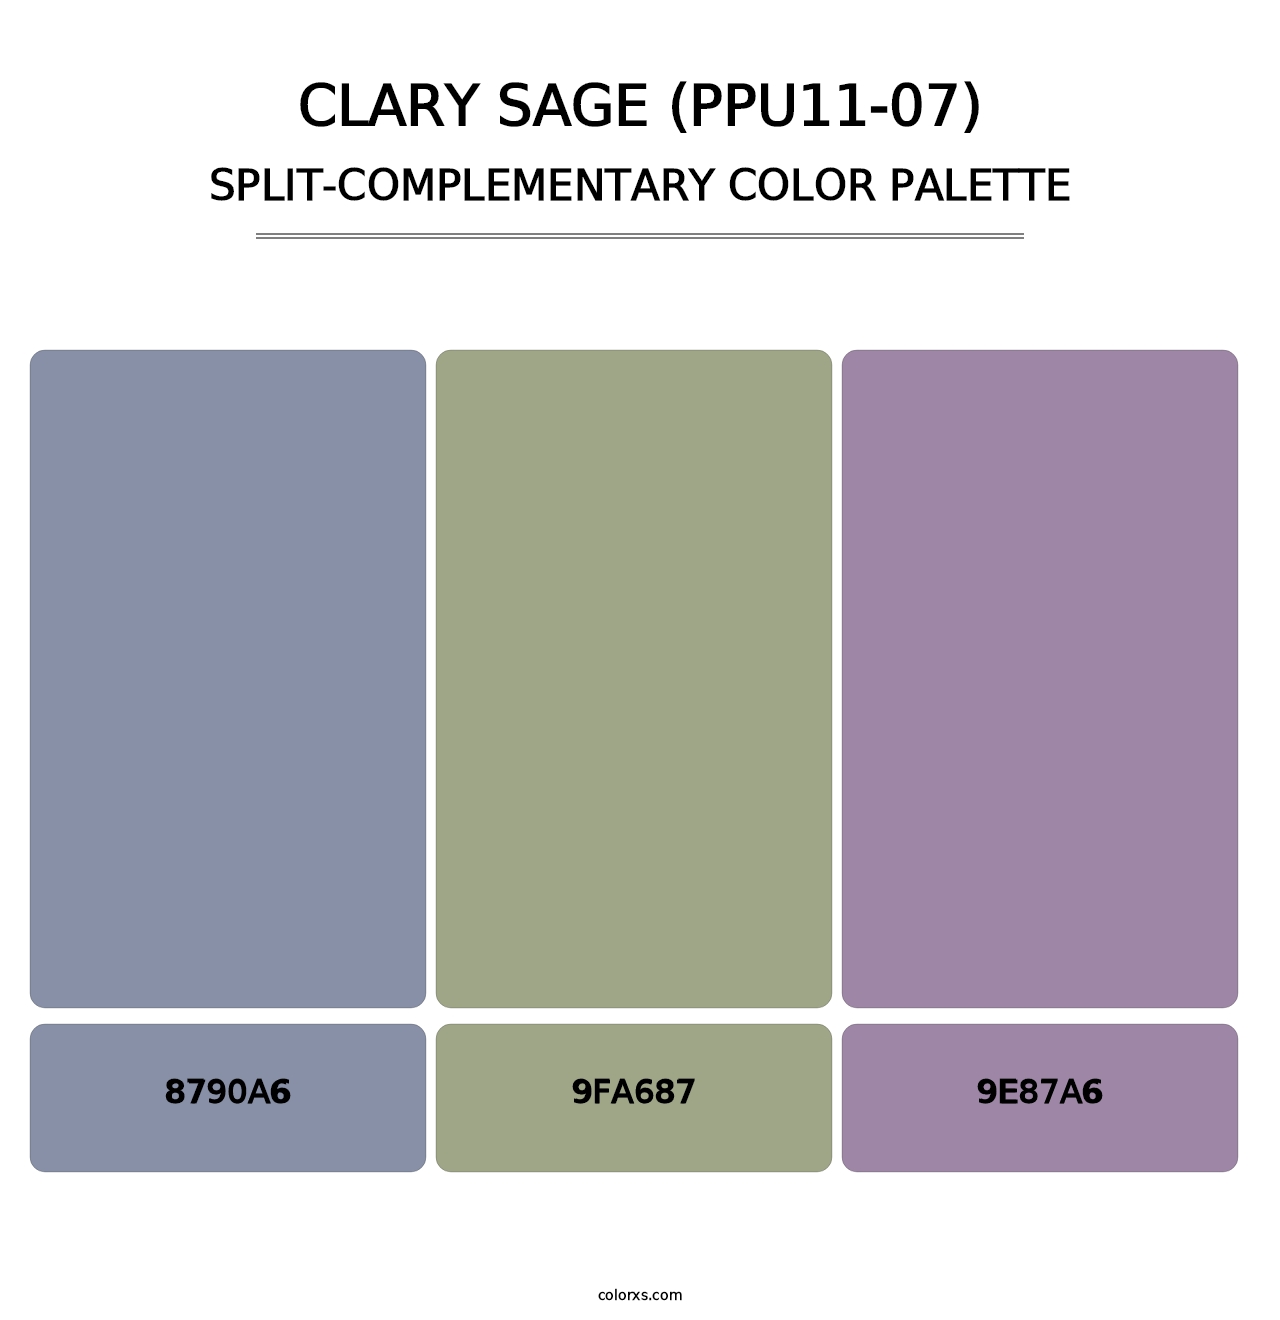 Clary Sage (PPU11-07) - Split-Complementary Color Palette